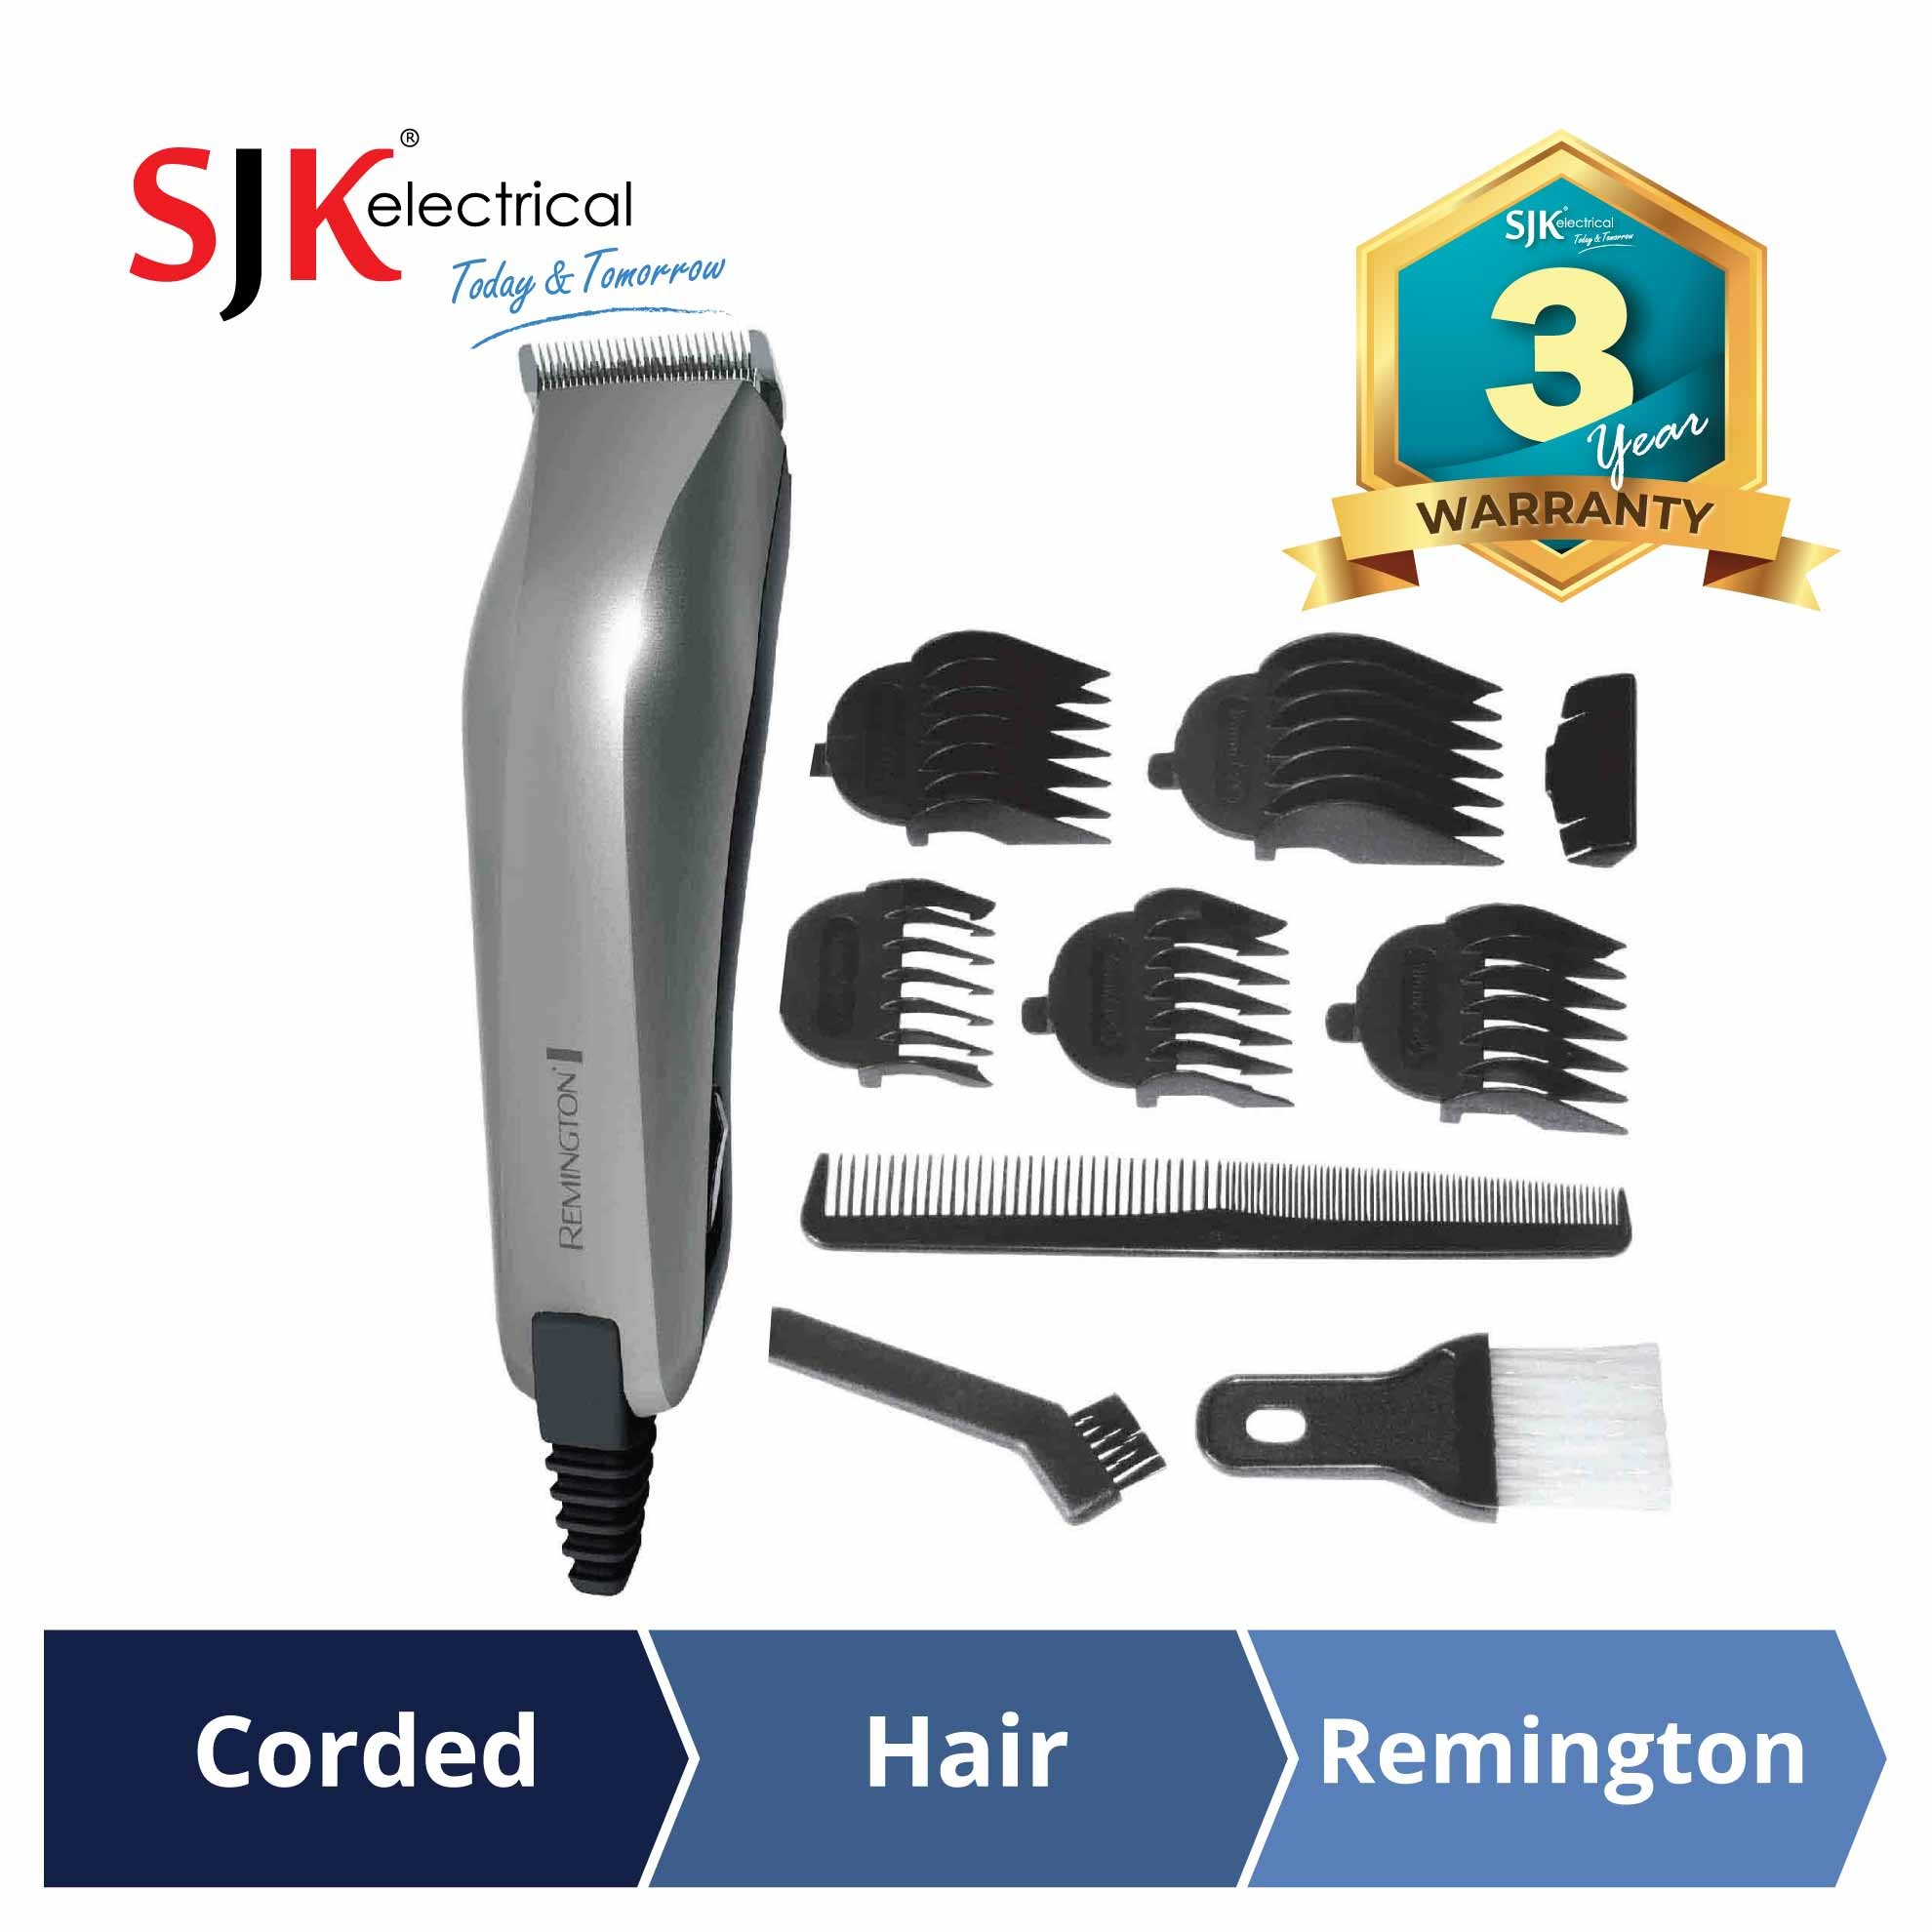 remington hair clippers attachment combs